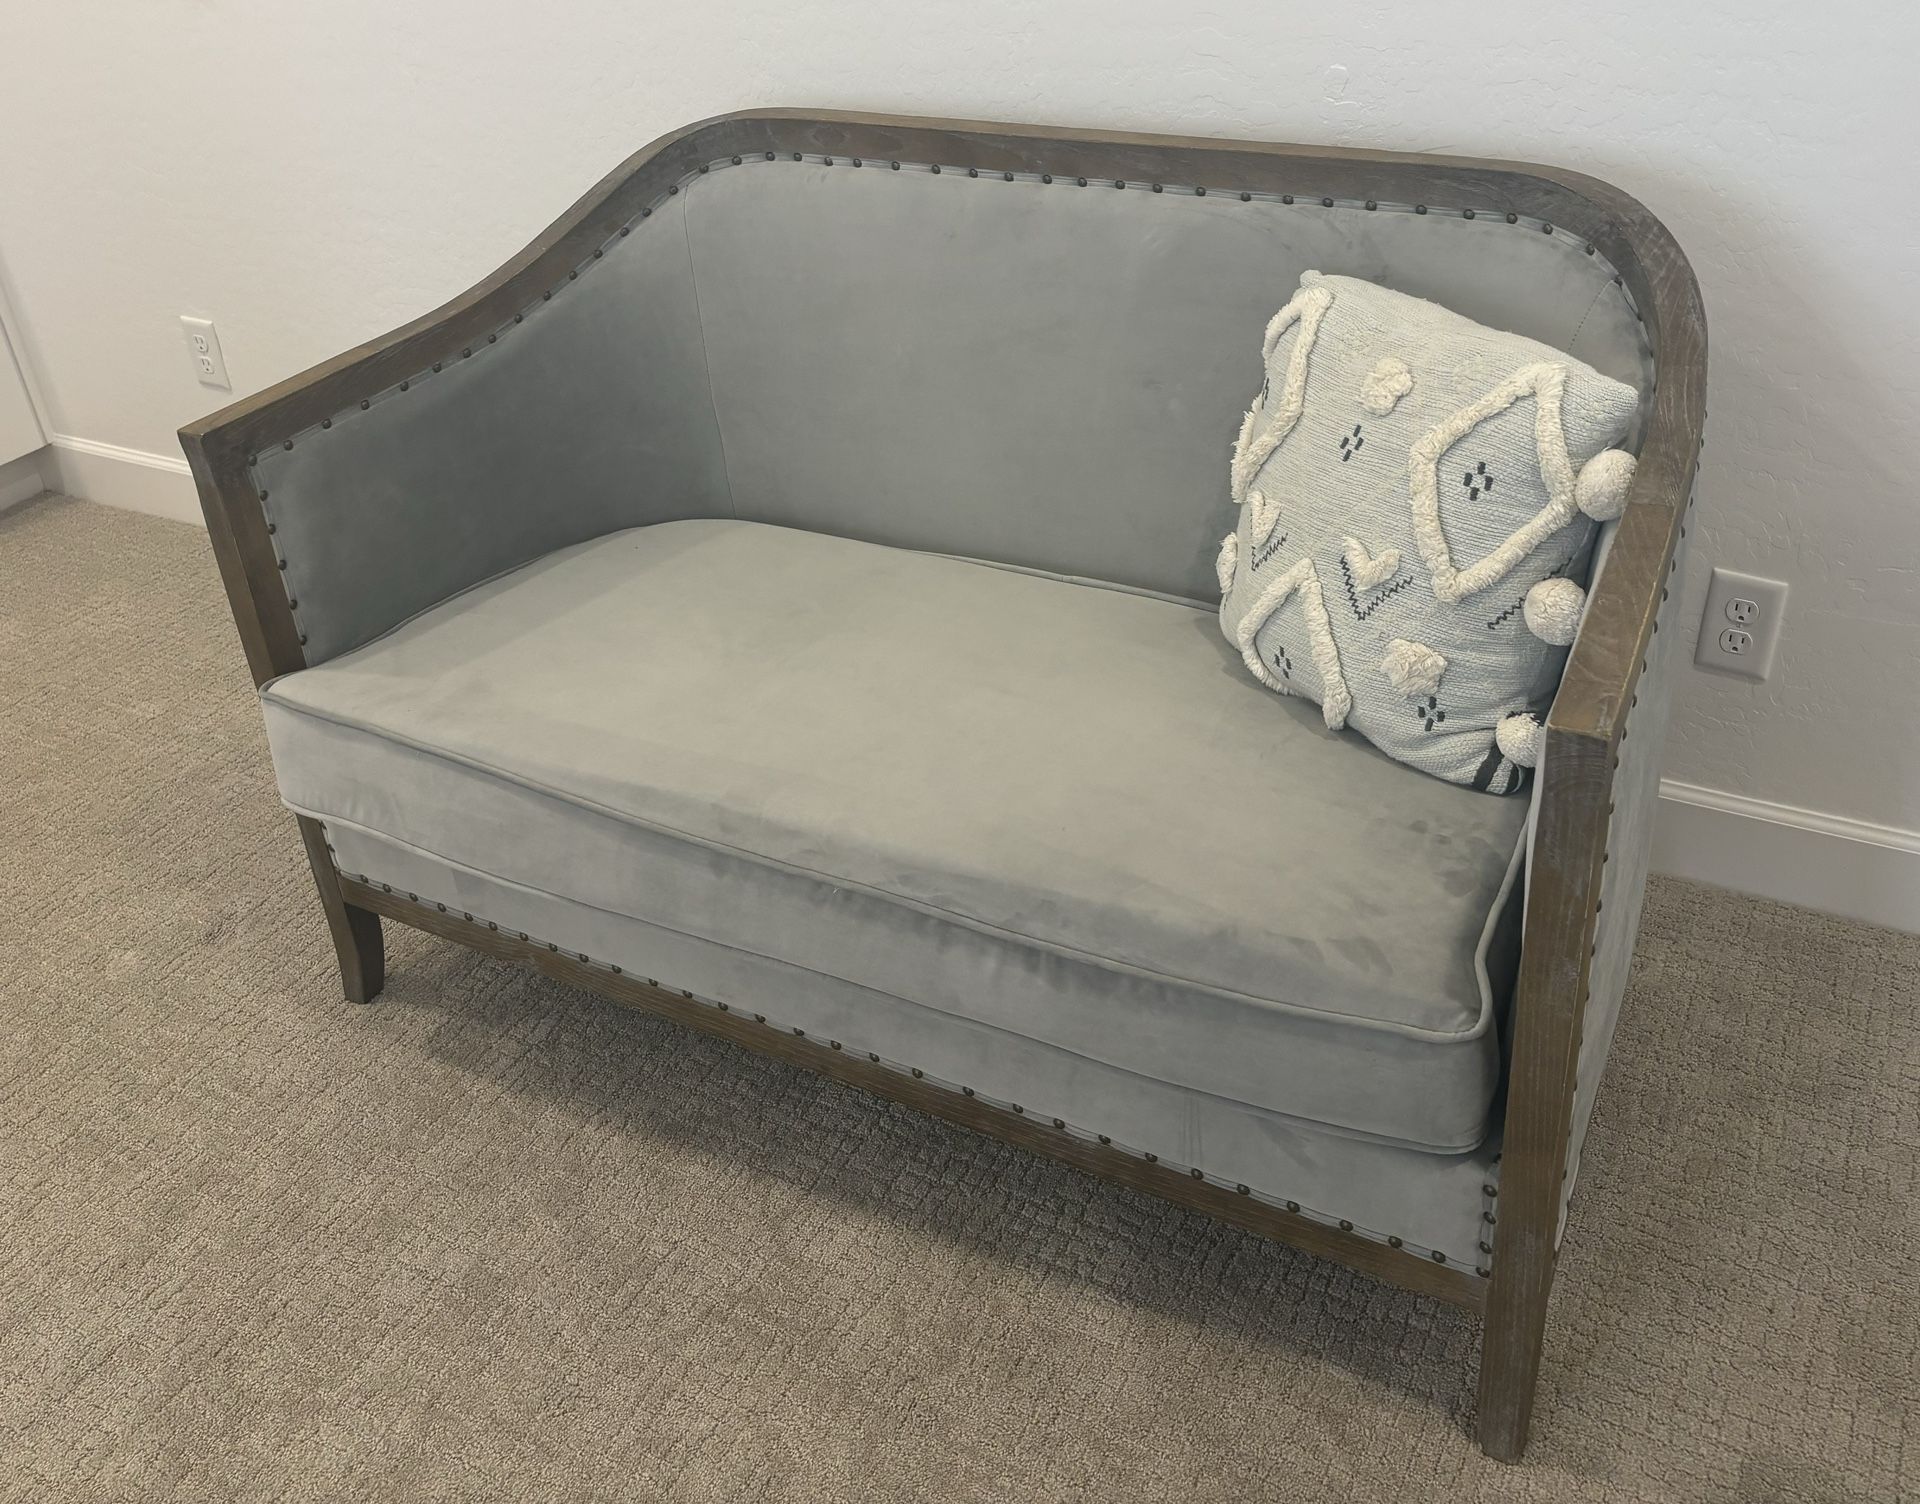 Suede Love Seat/Accent small Couch